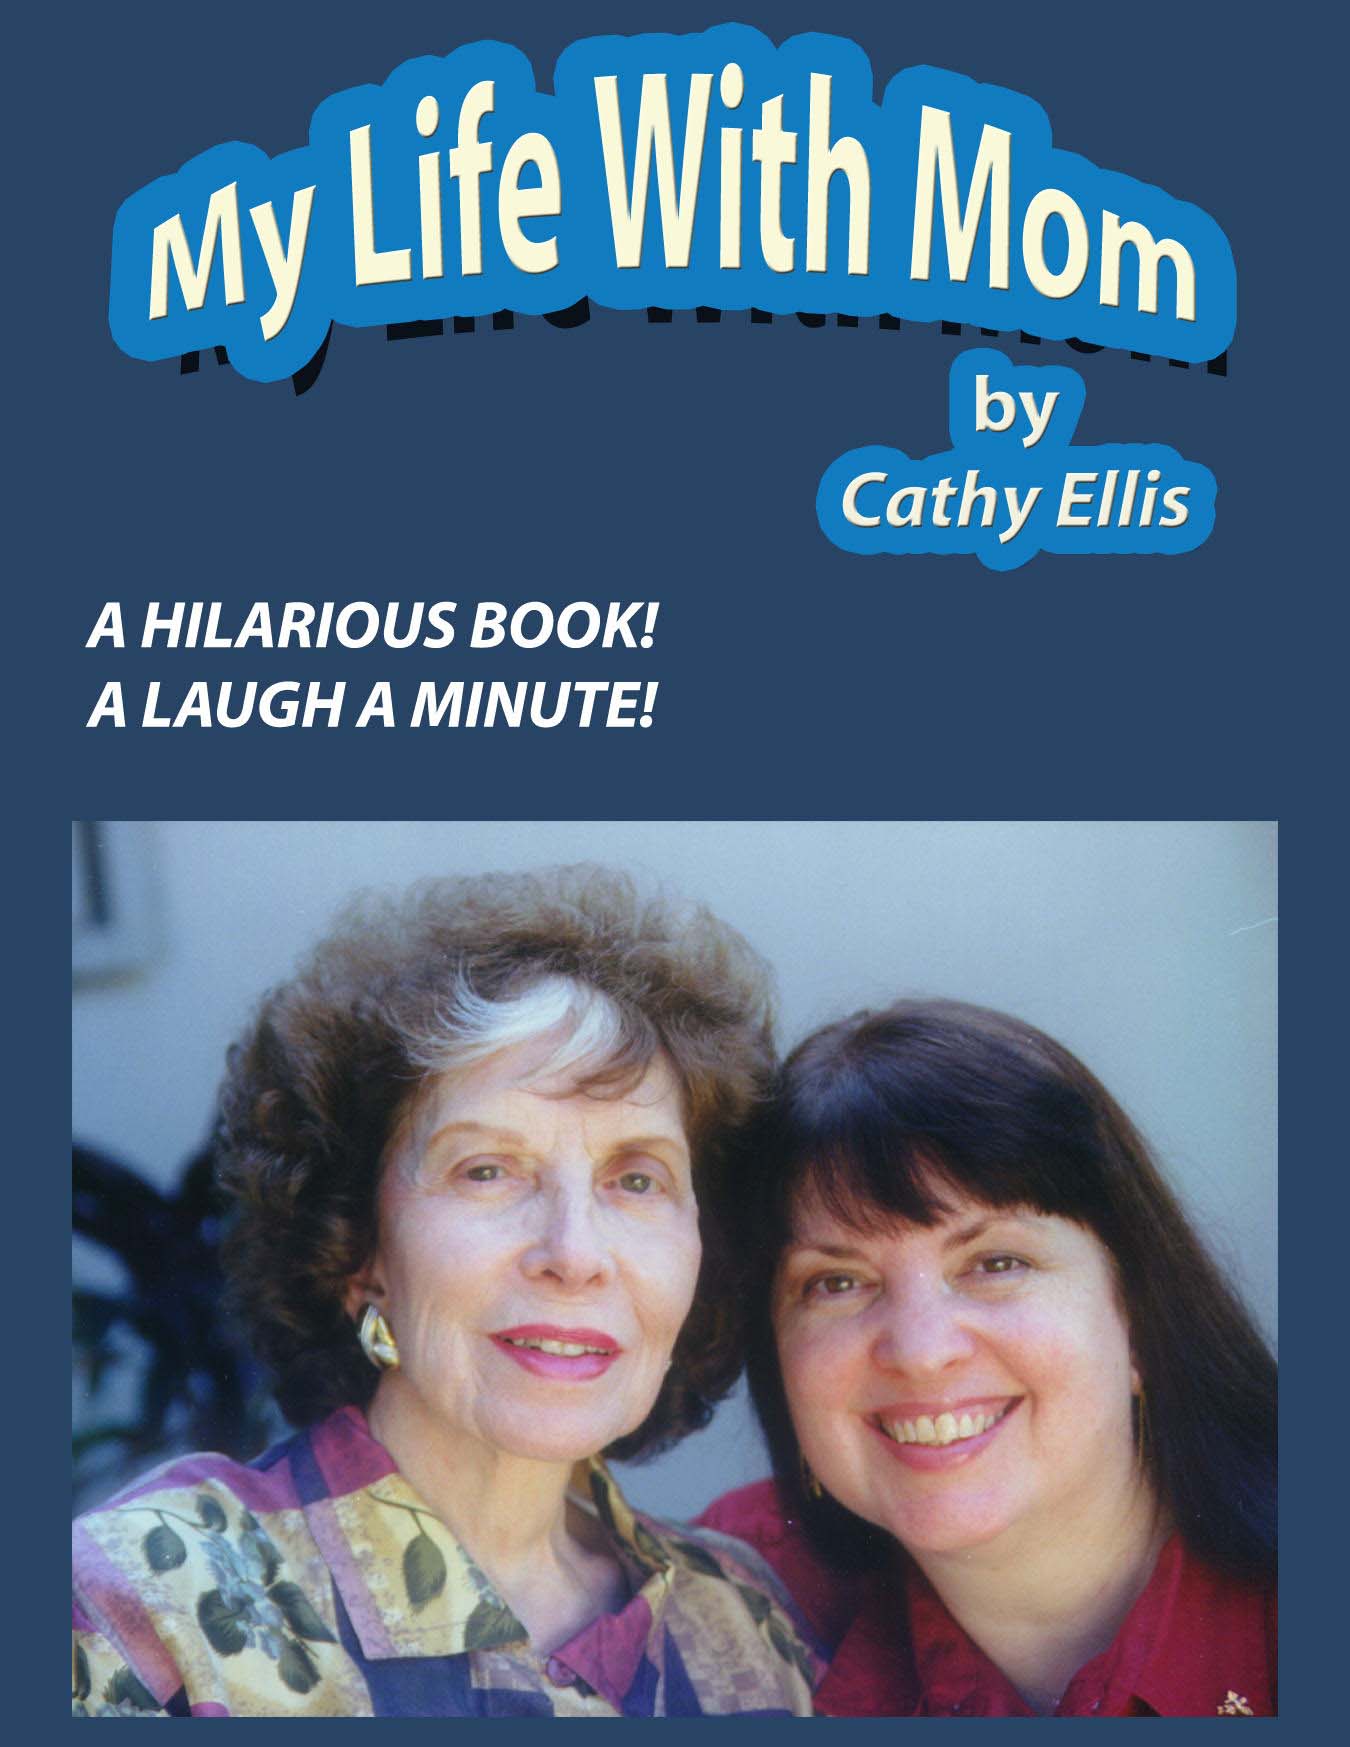 Esther & Cathy Ellis on the cover of the hard cover book 